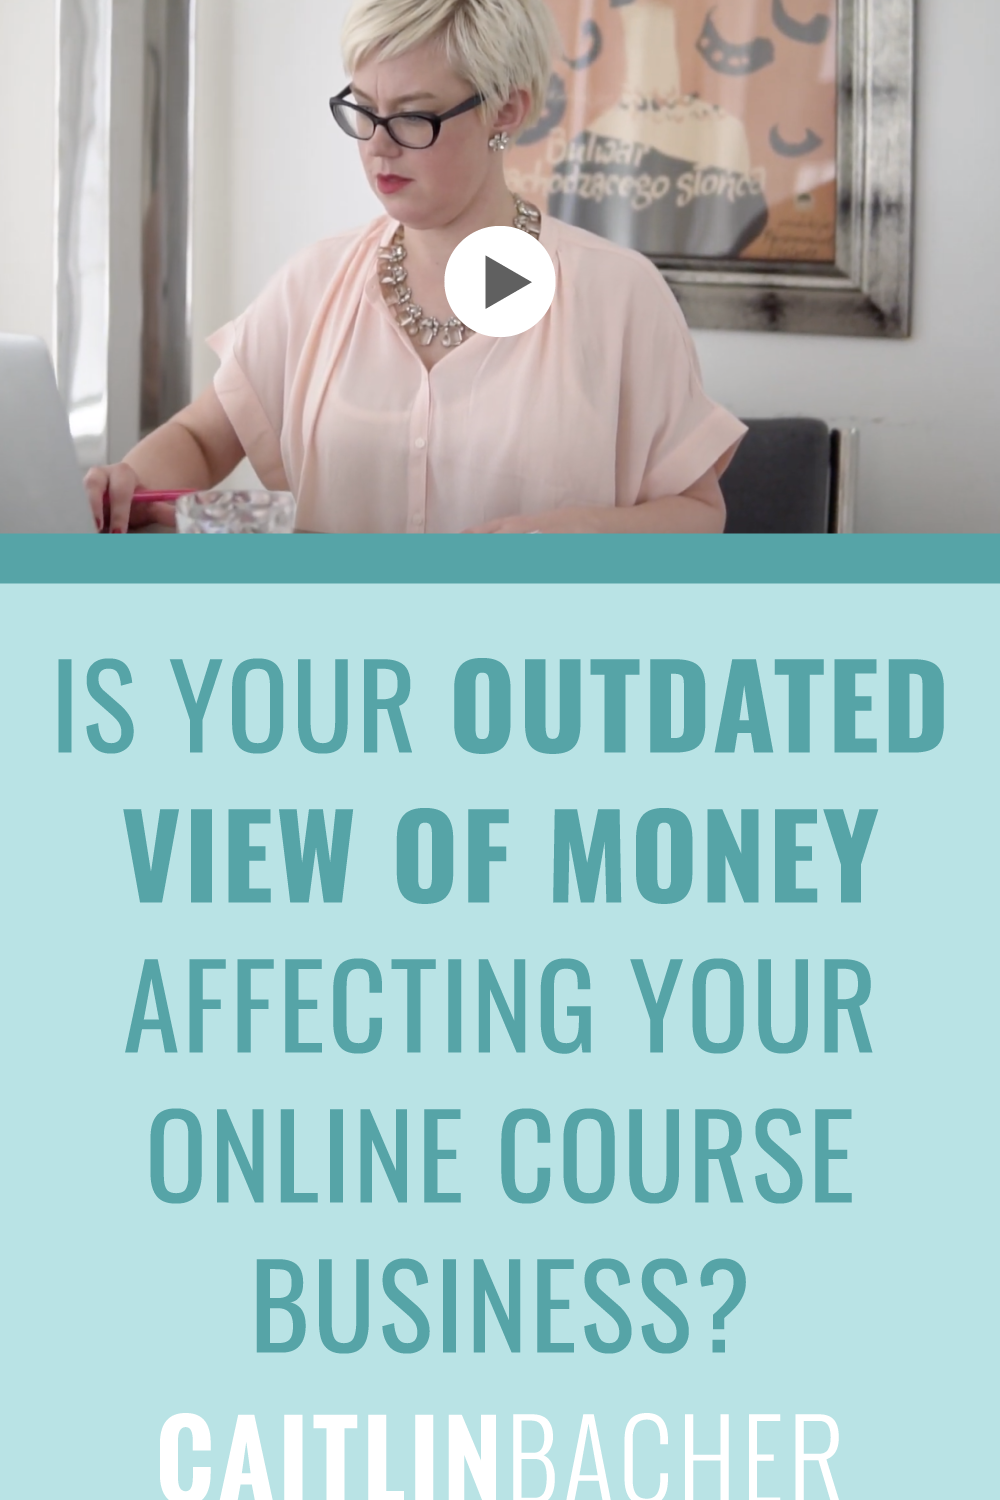 Is Your Outdated View Of Money Affecting Your Online Course Business?